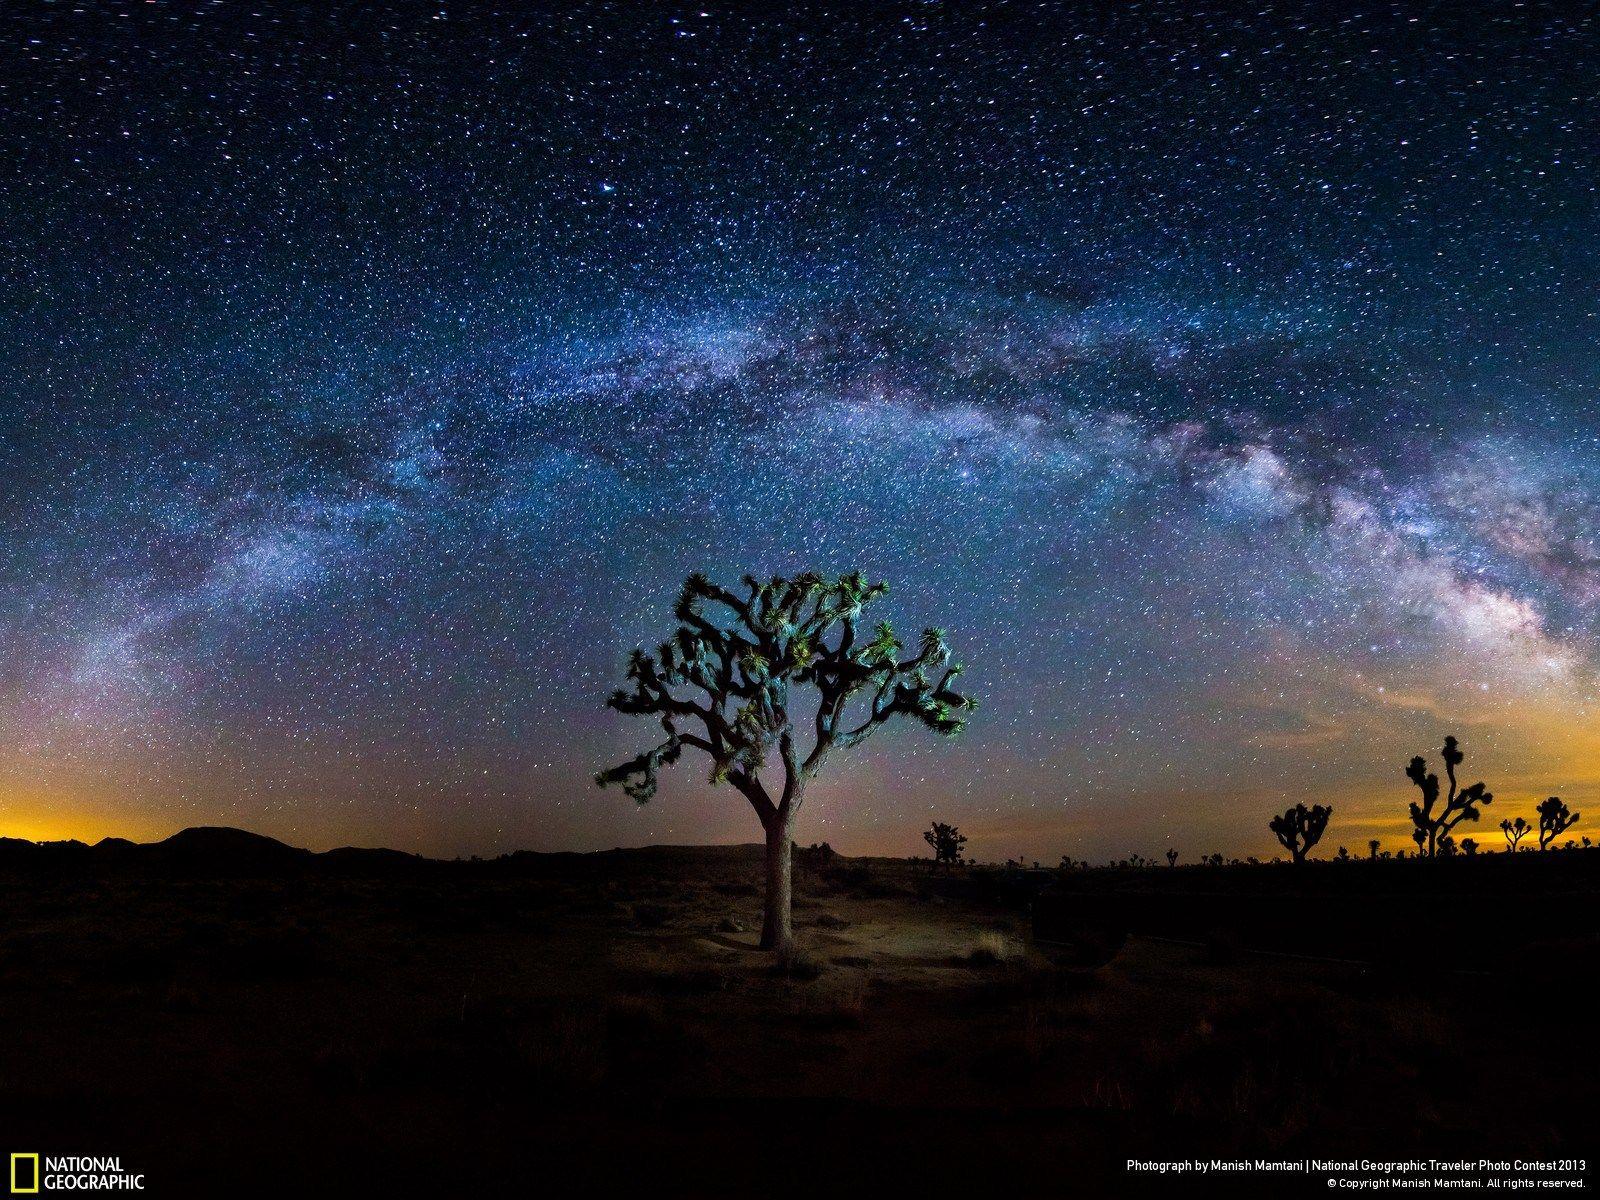 Joshua Tree: 28 Stunning Photo From America's Most Buzzed About